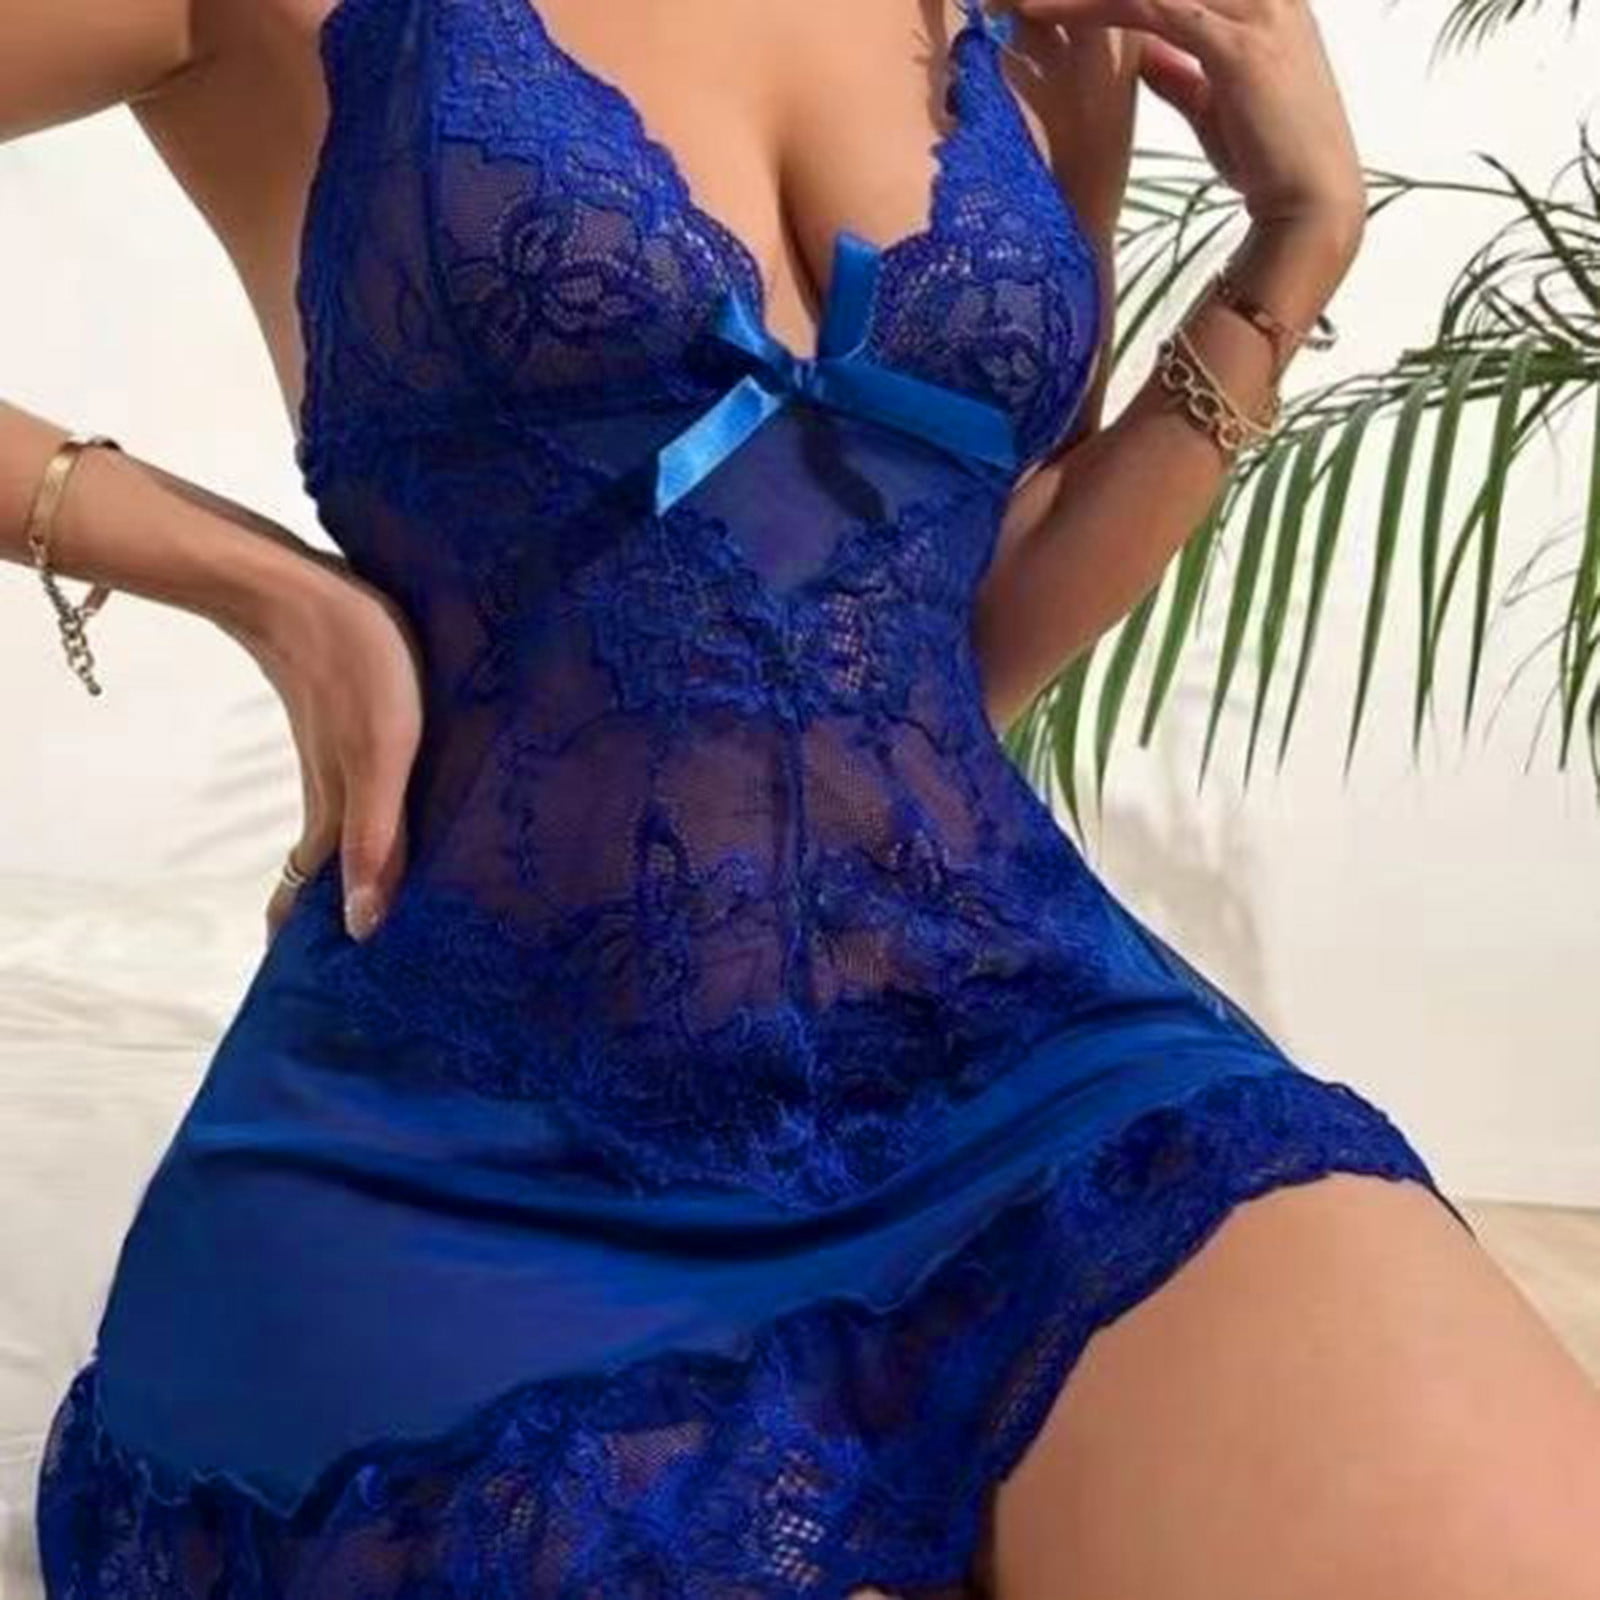 Buy Jara Sexy Night Wear for Women / Girls / Free Size Online at Low Prices  in India - Paytmmall.com